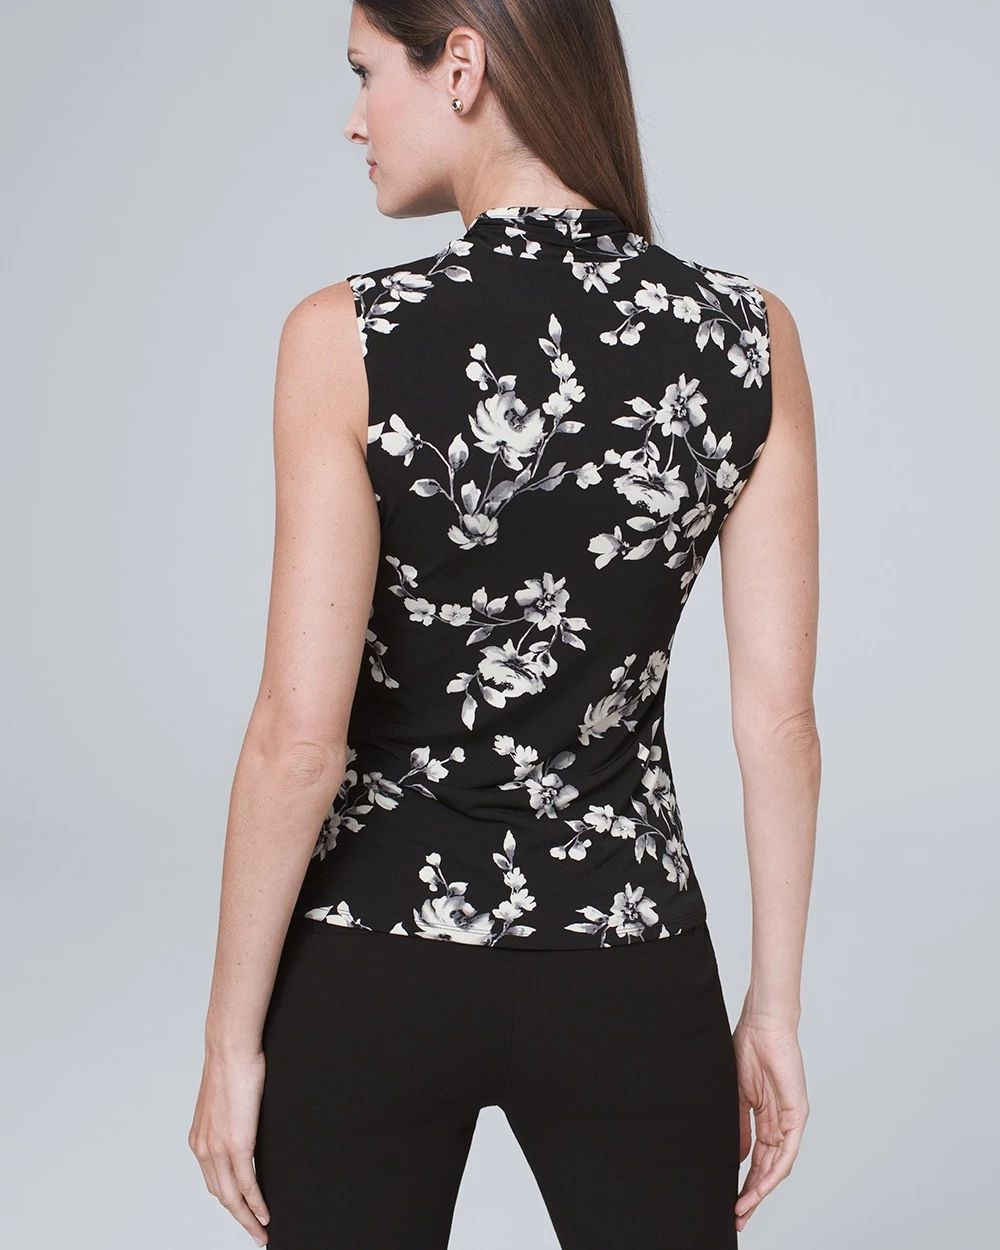 Sleeveless Ruched Floral-Print Top click to view larger image.